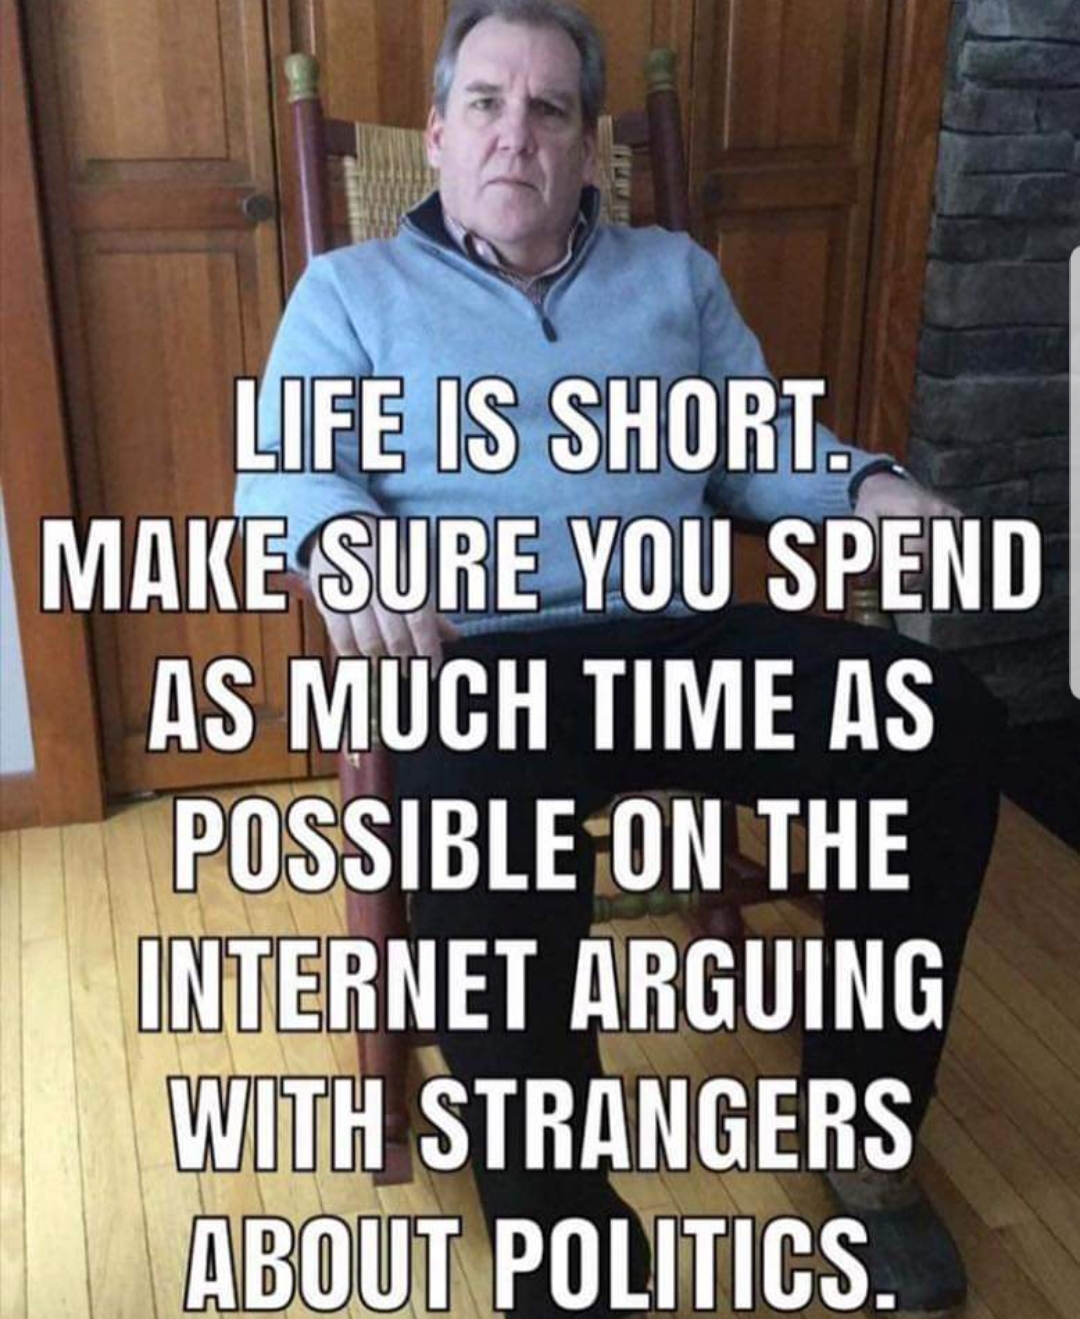 arguing with strangers on the internet - Life Is Short. Make Sure You Spend As Much Time As Possible On The Internet Arguing With Strangers About Politics.